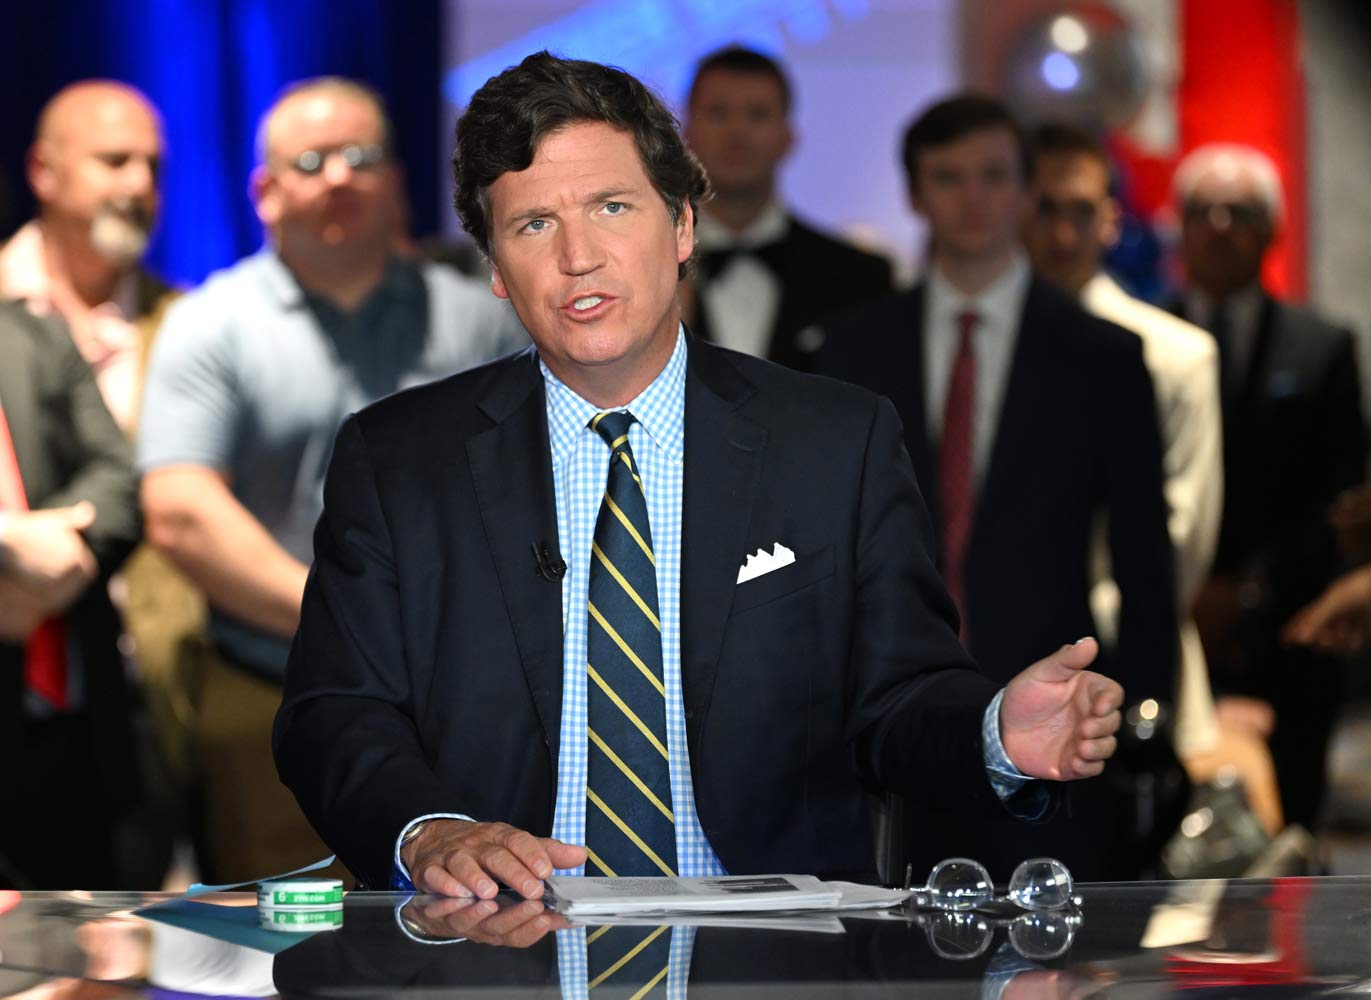 Tucker Carlson hired Los Angeles-based attorney Bryan Freedman after parting ways with Fox News. (Jason Koerner/Getty Images)